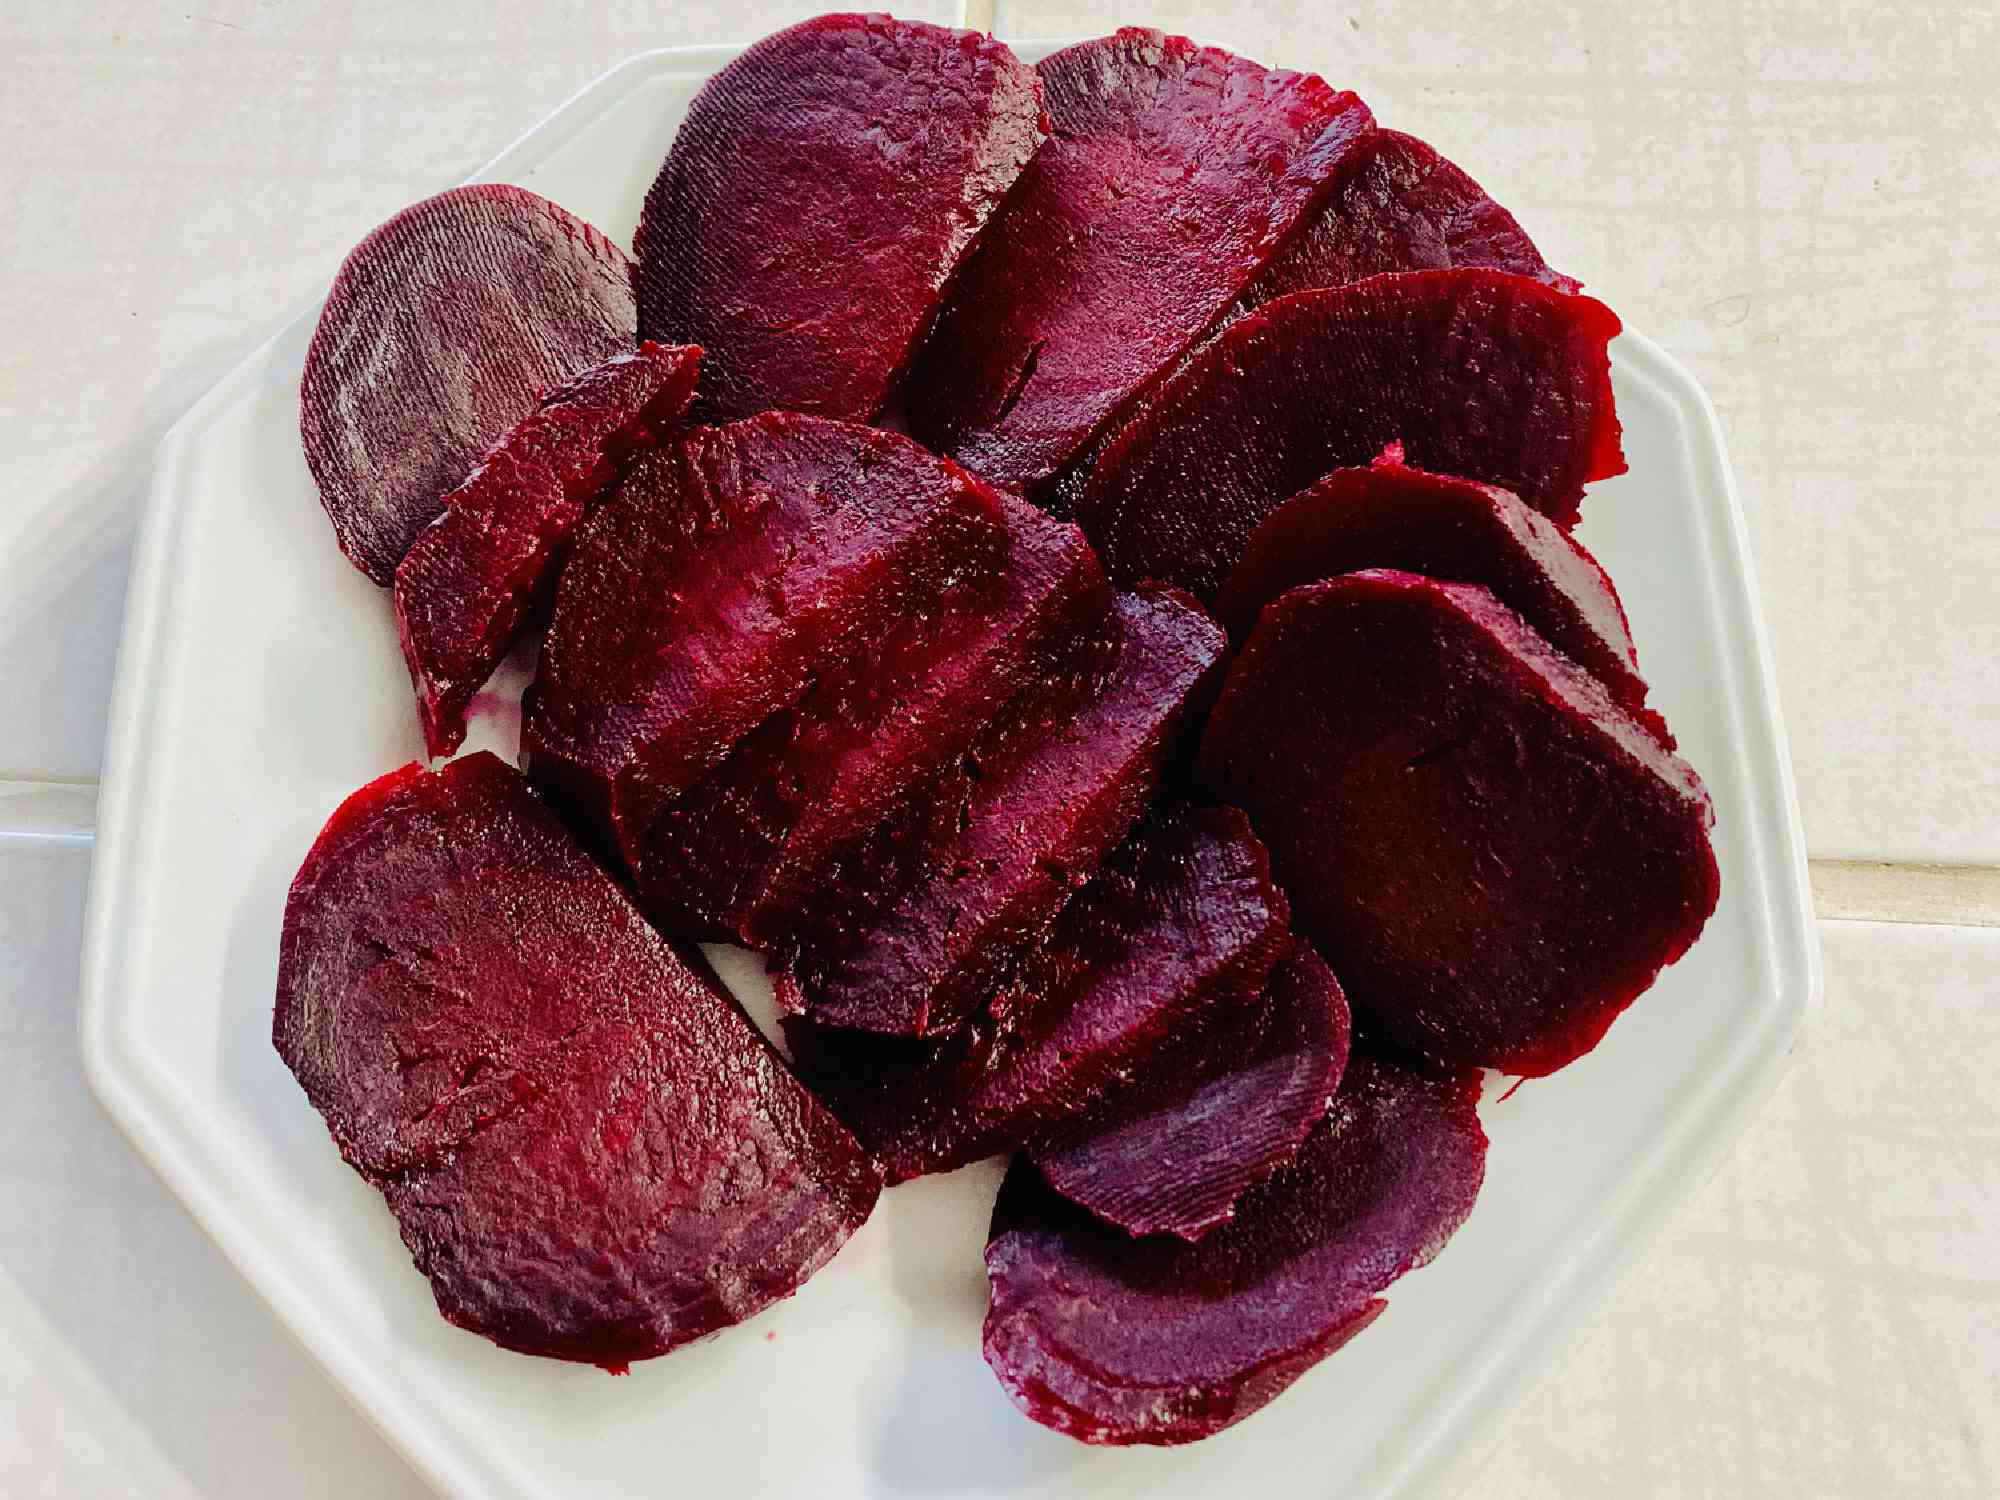 Cook Beets in Minutes With This Genius Hack